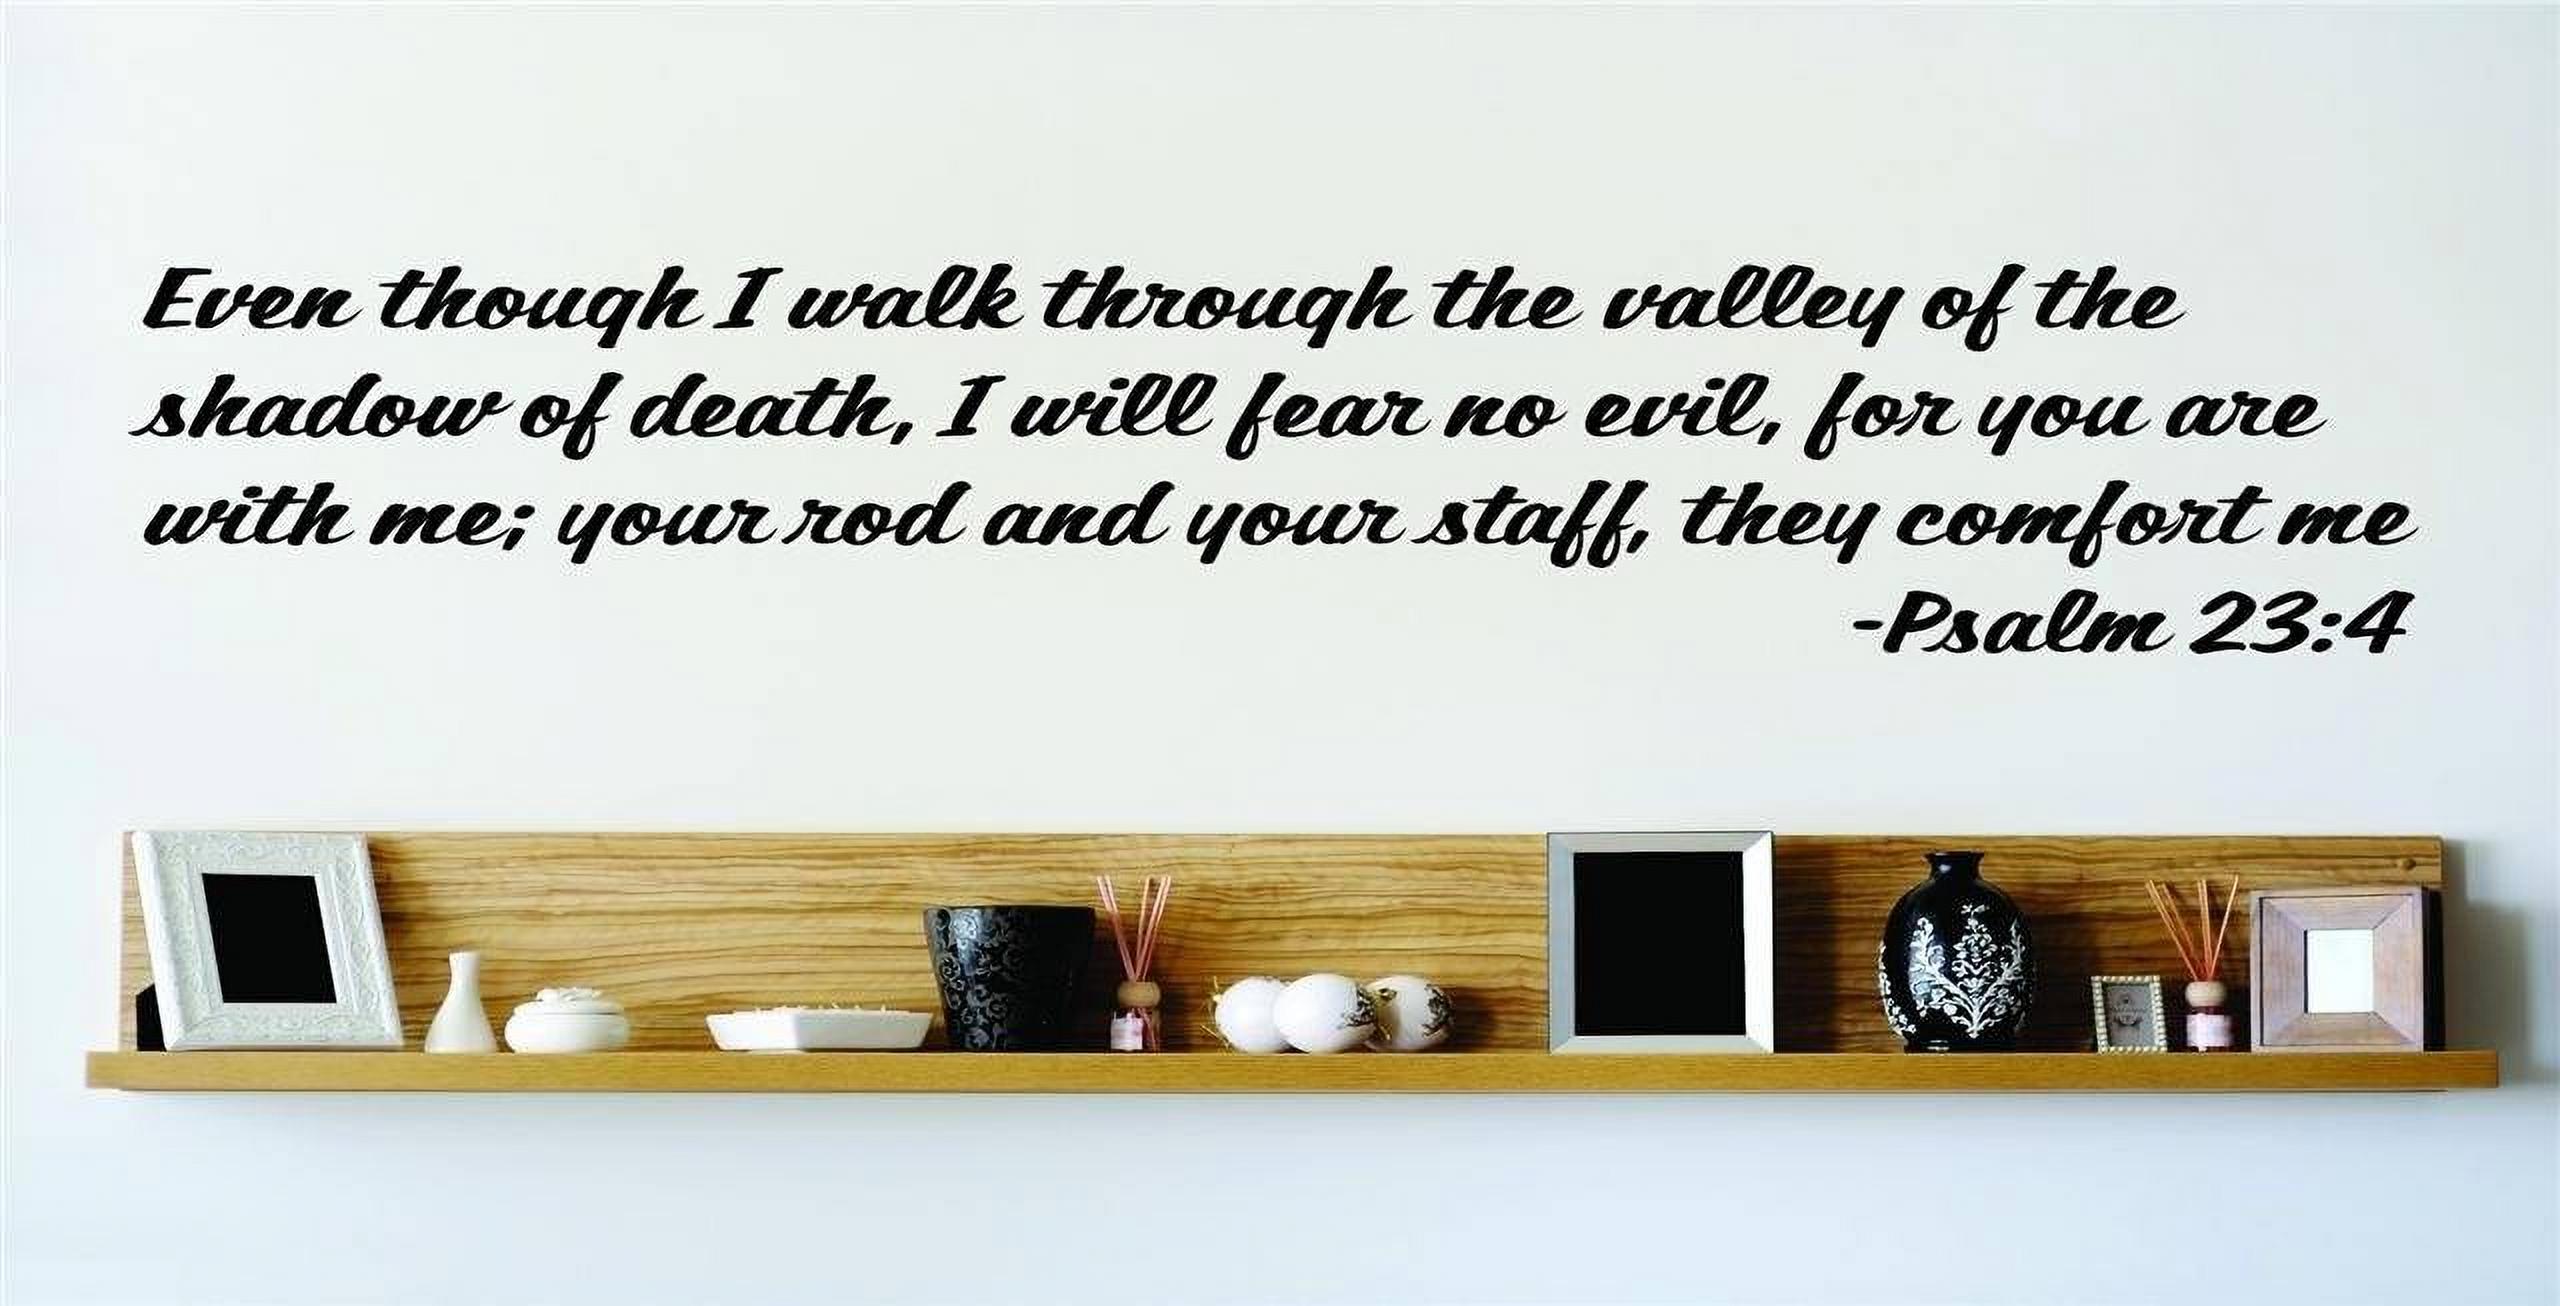 Even though I walk through the valley of the shadow of death, I will fear no evil - Psalm 23:4 Bible Quote Wall Decal 15x15 - image 1 of 1